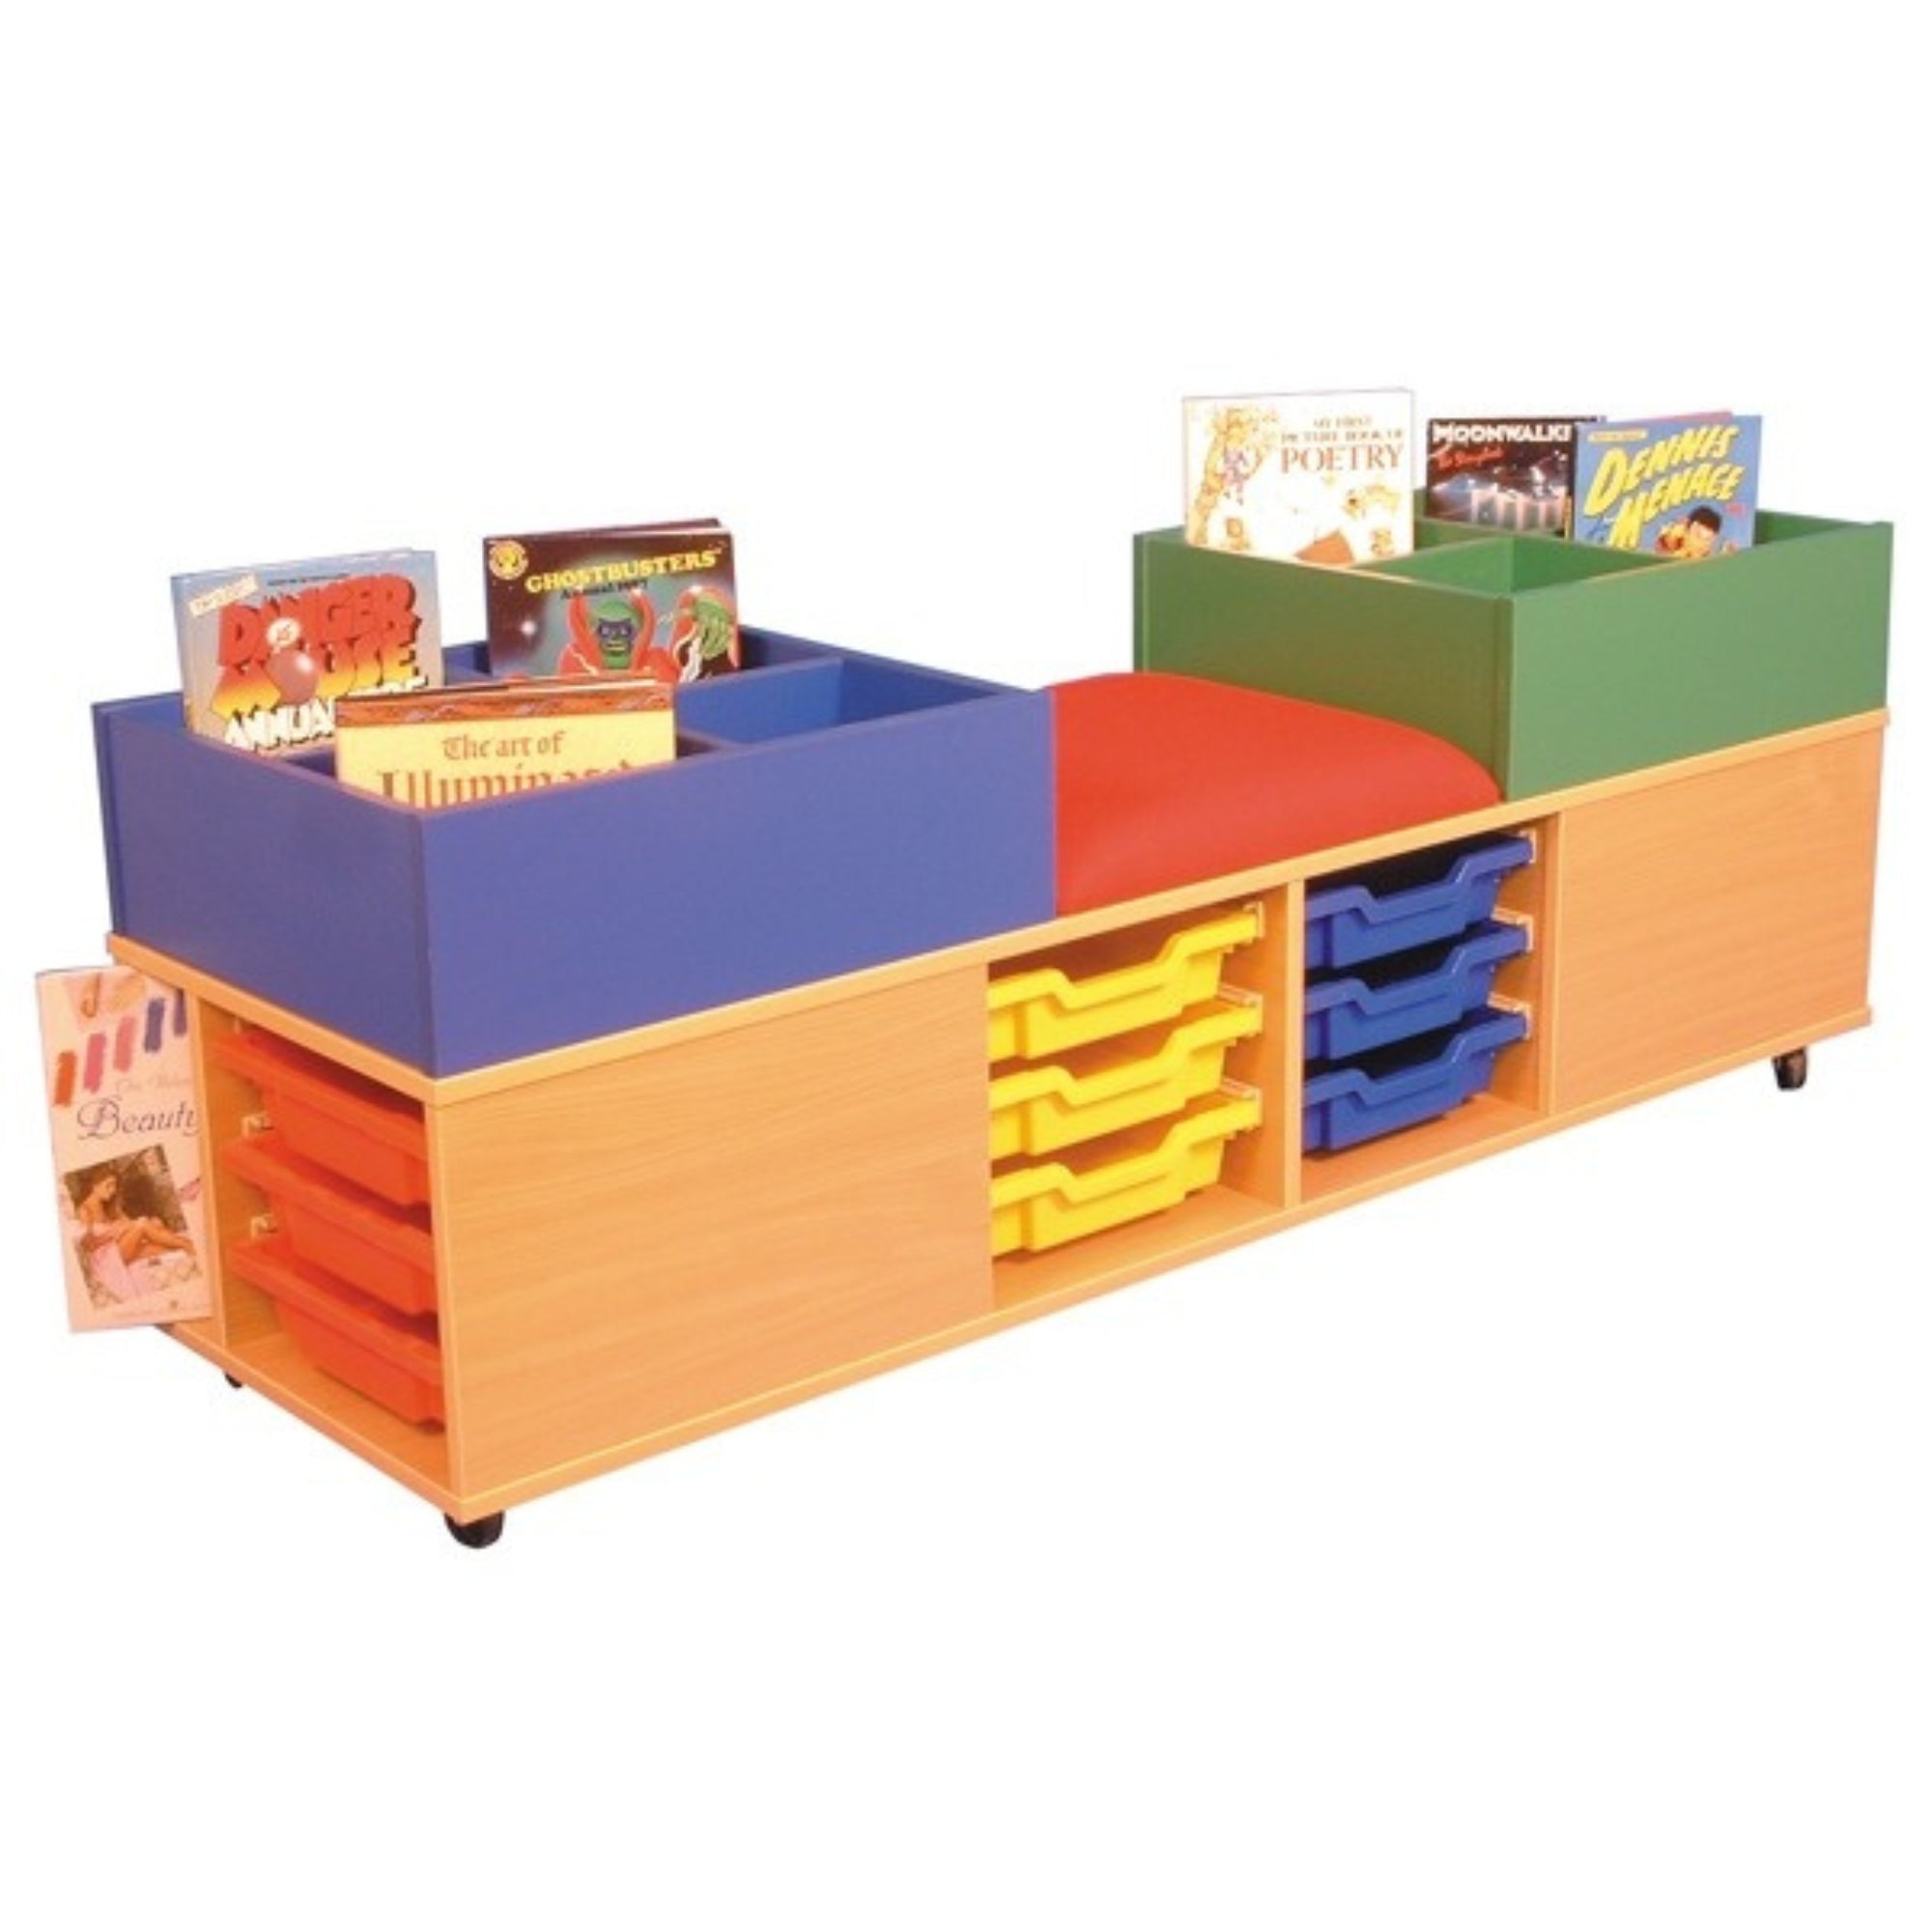 Mobile Seat And Tray Storage Unit With Twin Kinderboxes, Introducing the Mobile Seat and Tray Storage Unit with Twin Kinderboxes, the perfect addition to any nursery, early years or primary environment. This versatile unit offers a multifunctional solution to your storage, seating and display needs. Designed with waiting areas, group play and learning areas in mind, it features a soft, cushioned central seat and two four-compartment kinderboxes for easy organisation. Crafted in the UK from 18mm MFC, this st